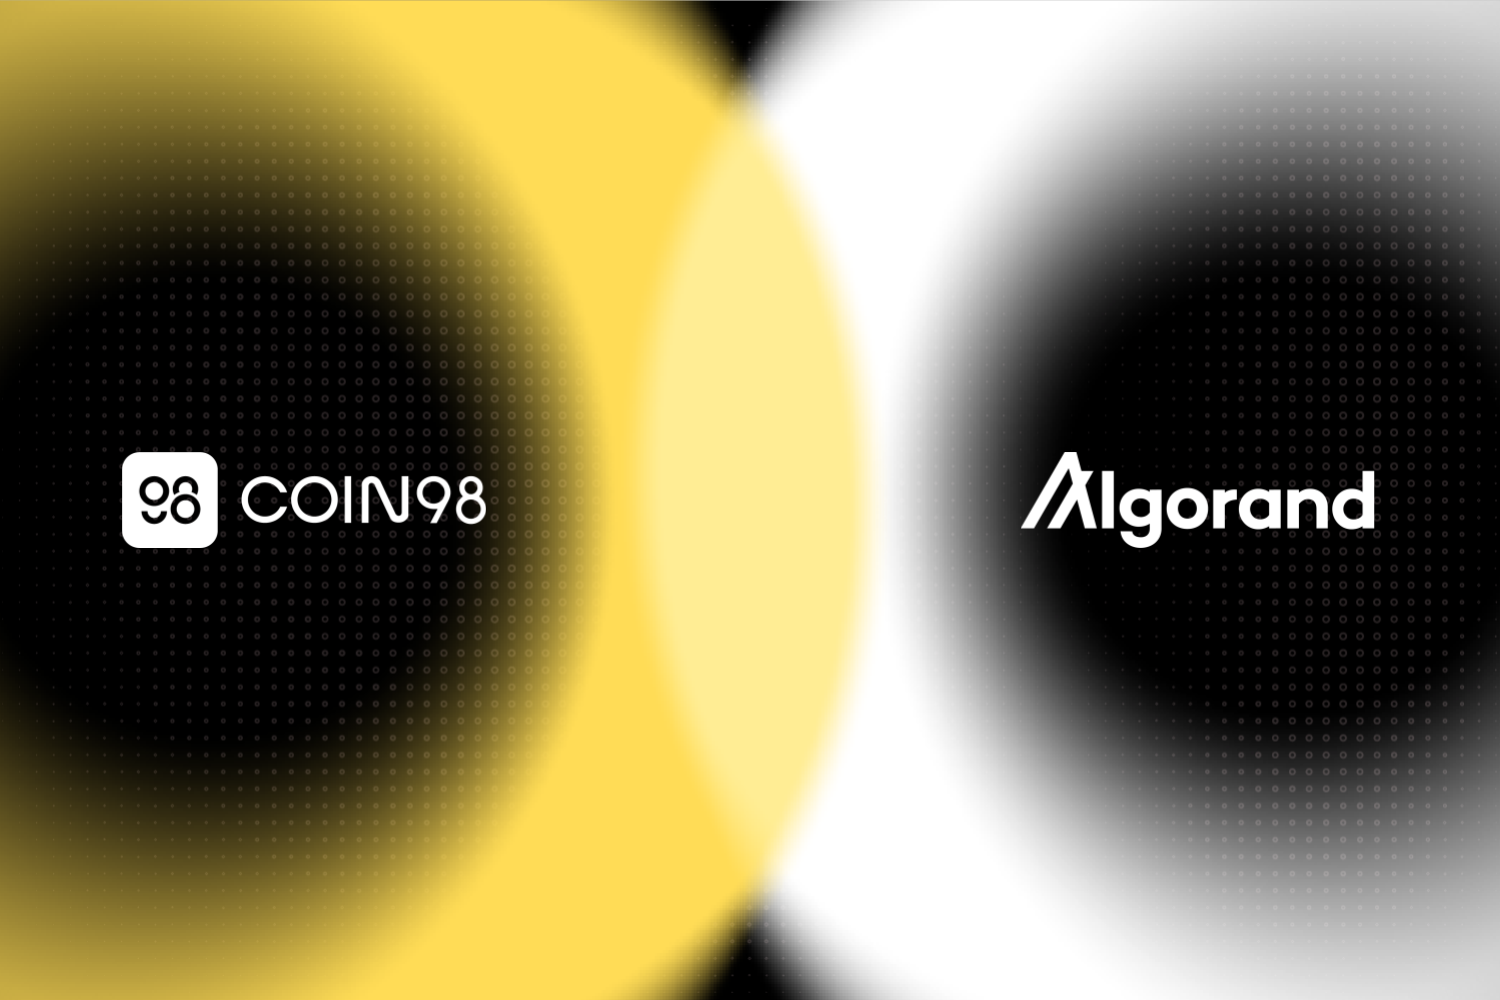 Coin98 supports Algorand - the to-be official blockchain platform of FIFA